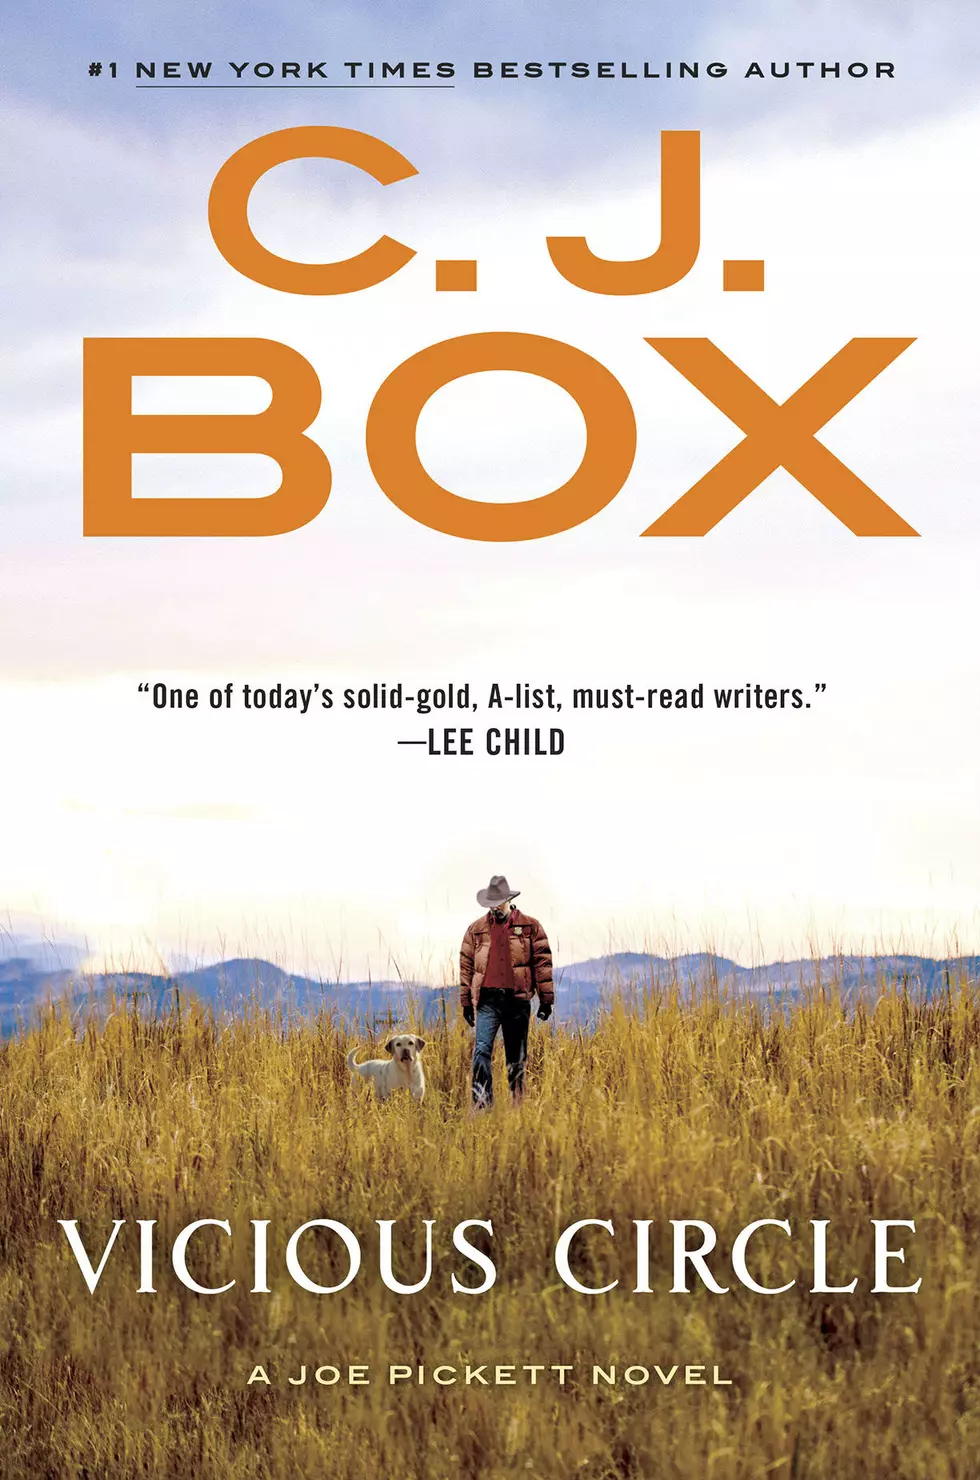 Bestselling Wyoming Author C.J. Box In Casper To Promote Latest Book